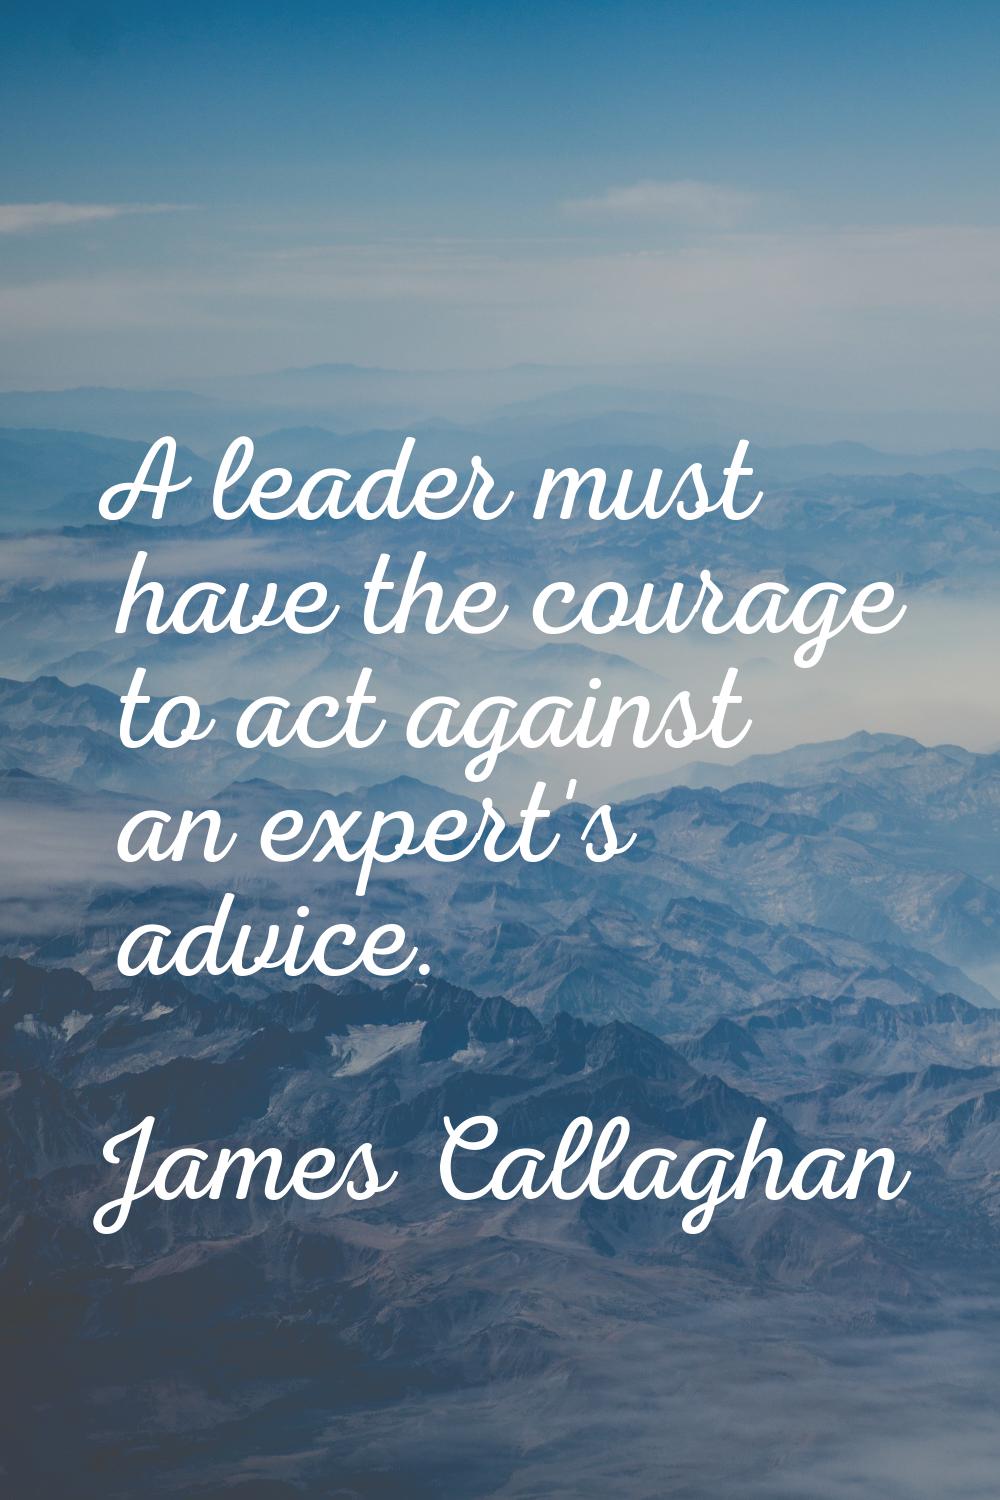 A leader must have the courage to act against an expert's advice.